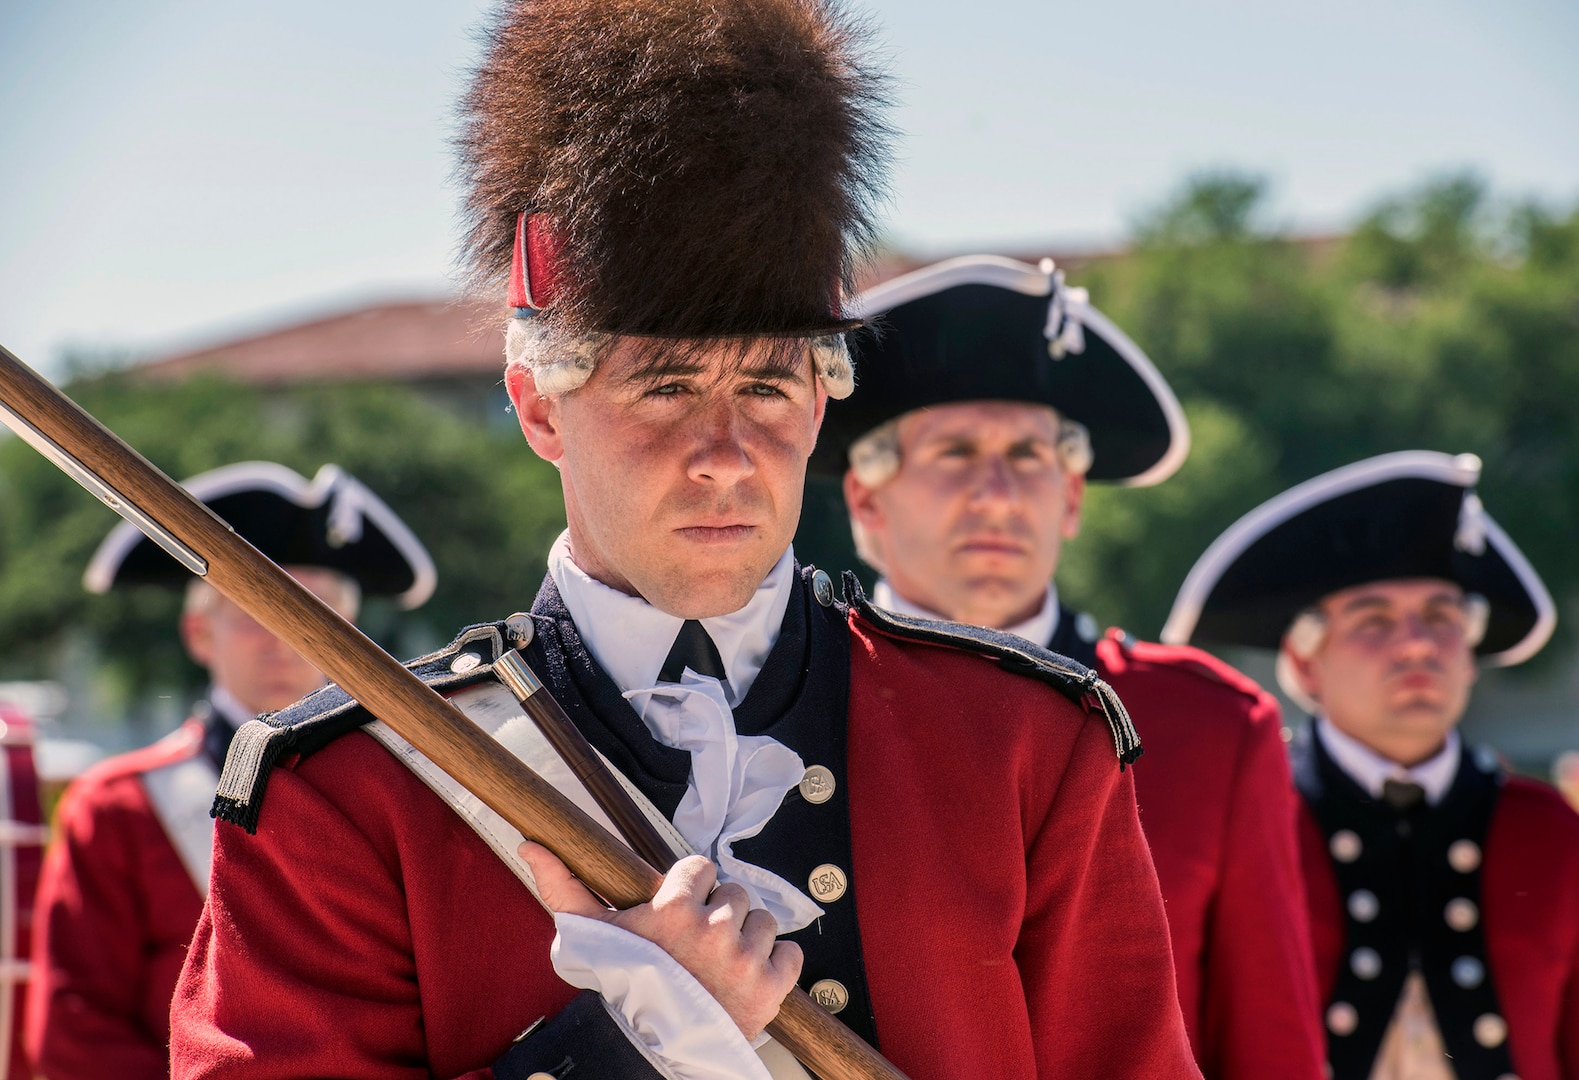 Members of the Army Fife and Drum Corps perform May 5 at MacArthur Parade Field at Joint Base San Antonio-Fort Sam Houston during the Military Appreciation Weekend celebration May 5-6.